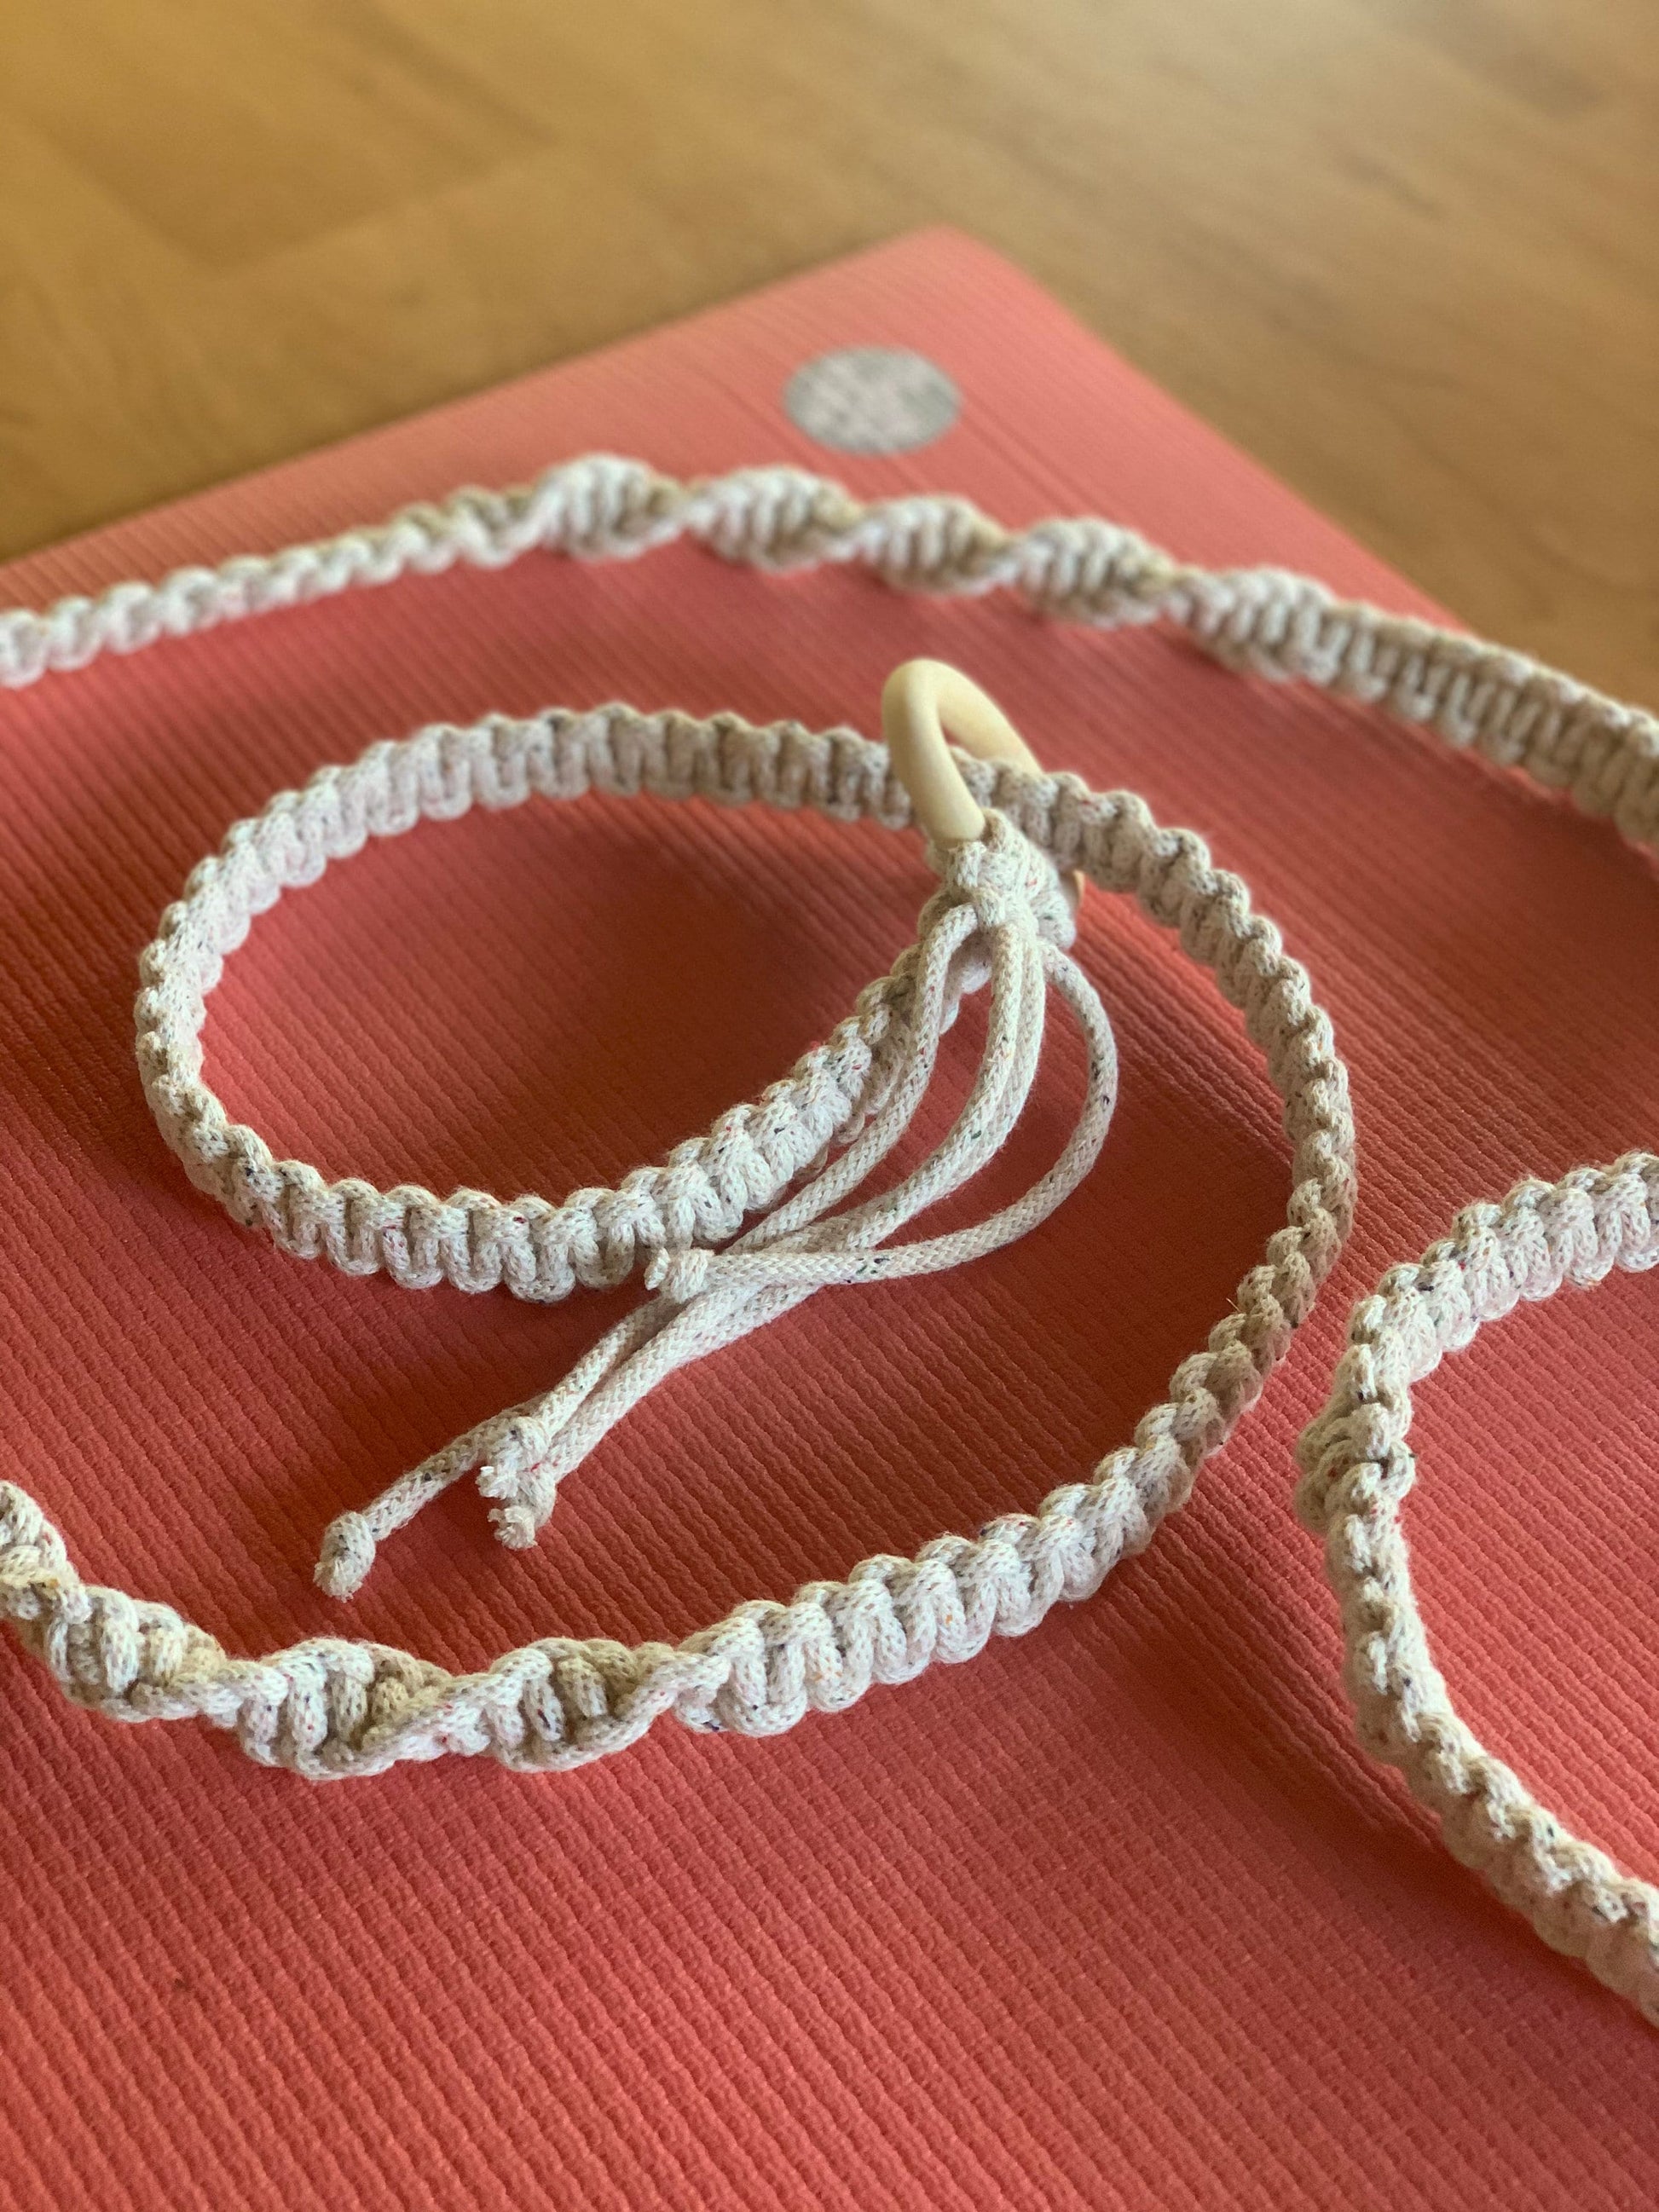 Macrame Yoga Mat Strap with wooden bead tassels and rings